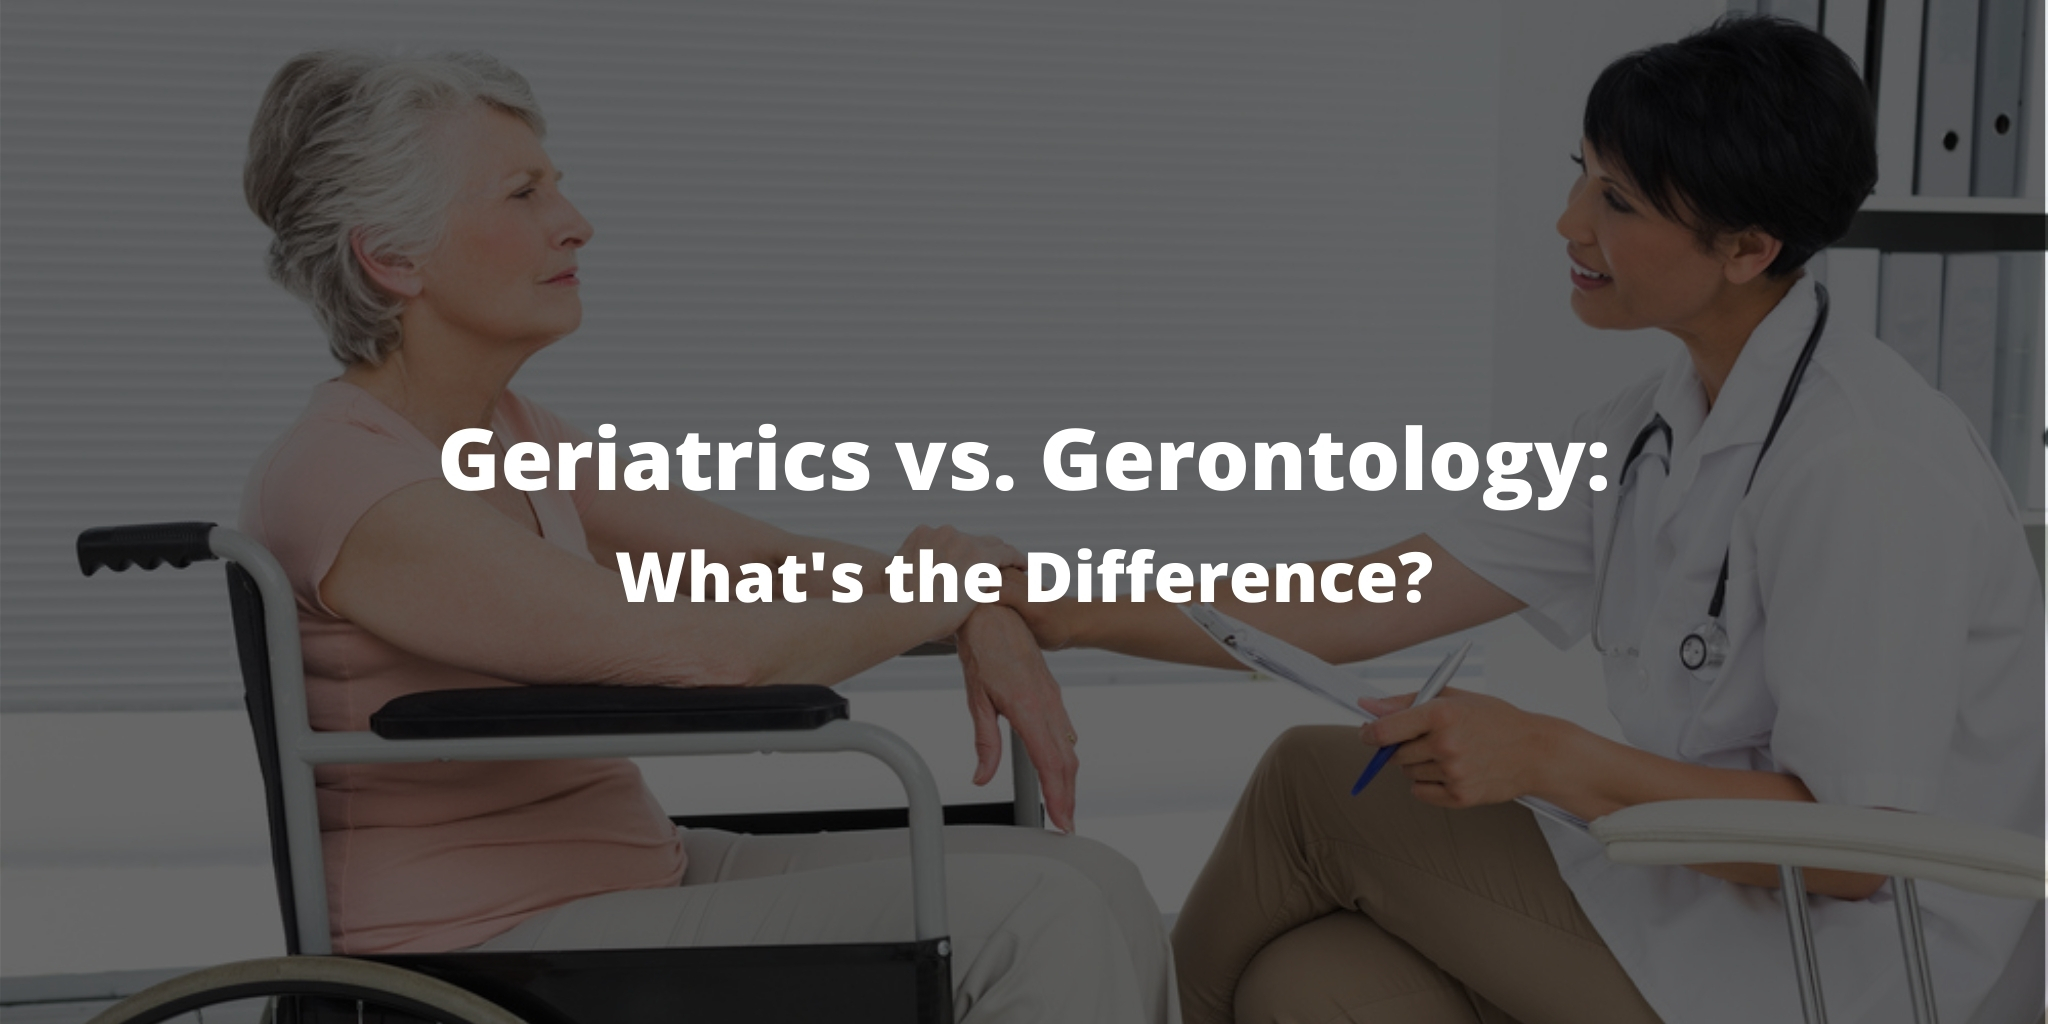 Geriatrics vs. Gerontology: What's the Difference?